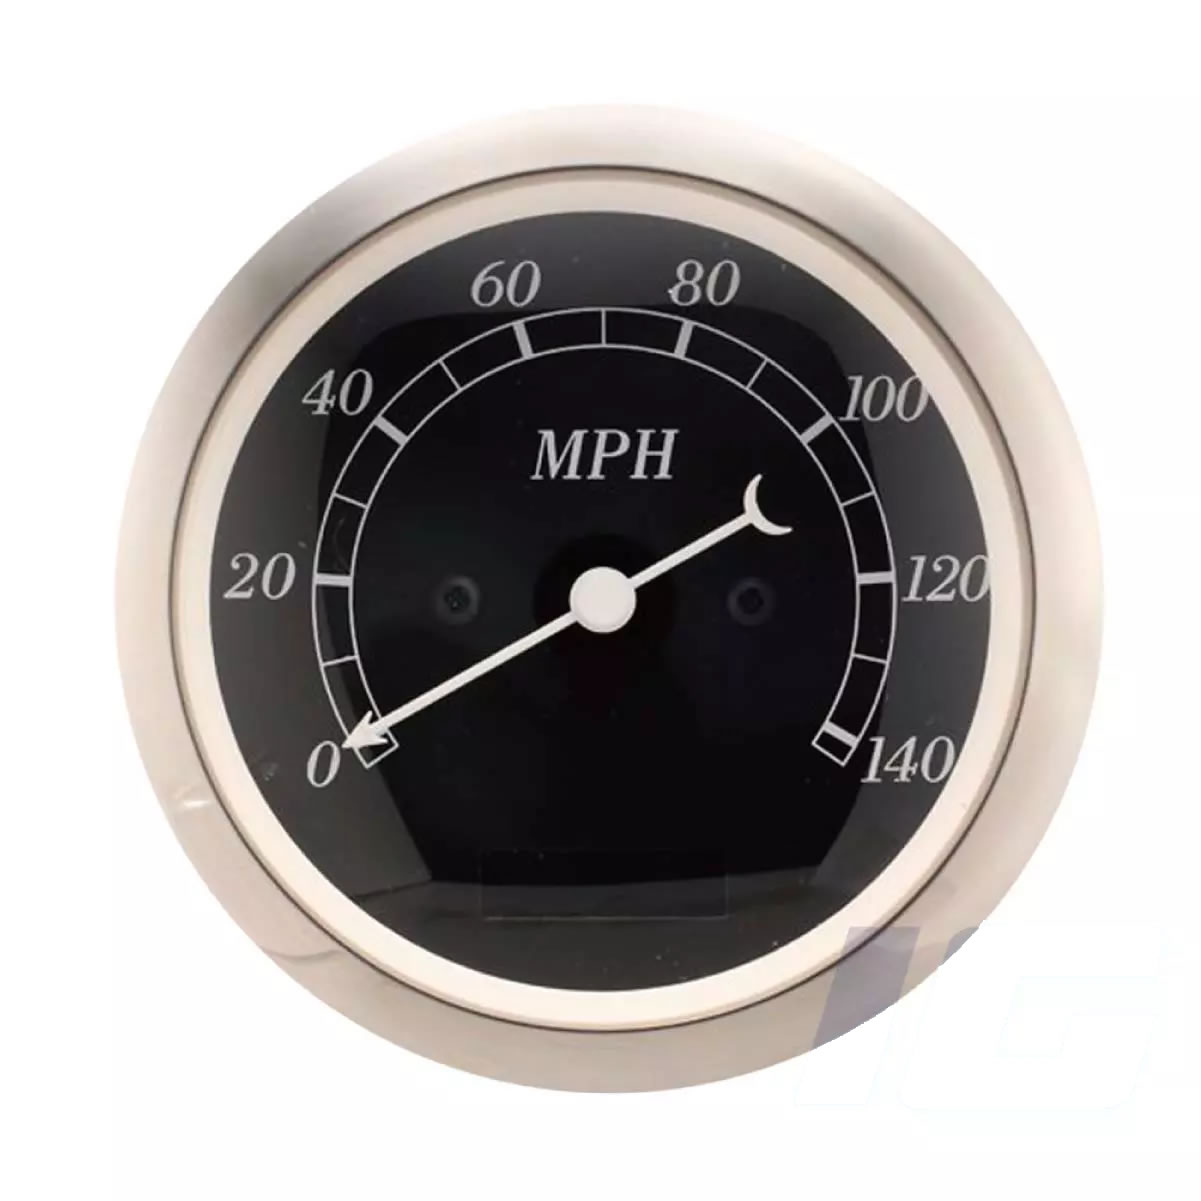 Black Face White Needle - Electrical Speedometer For Vintage Car